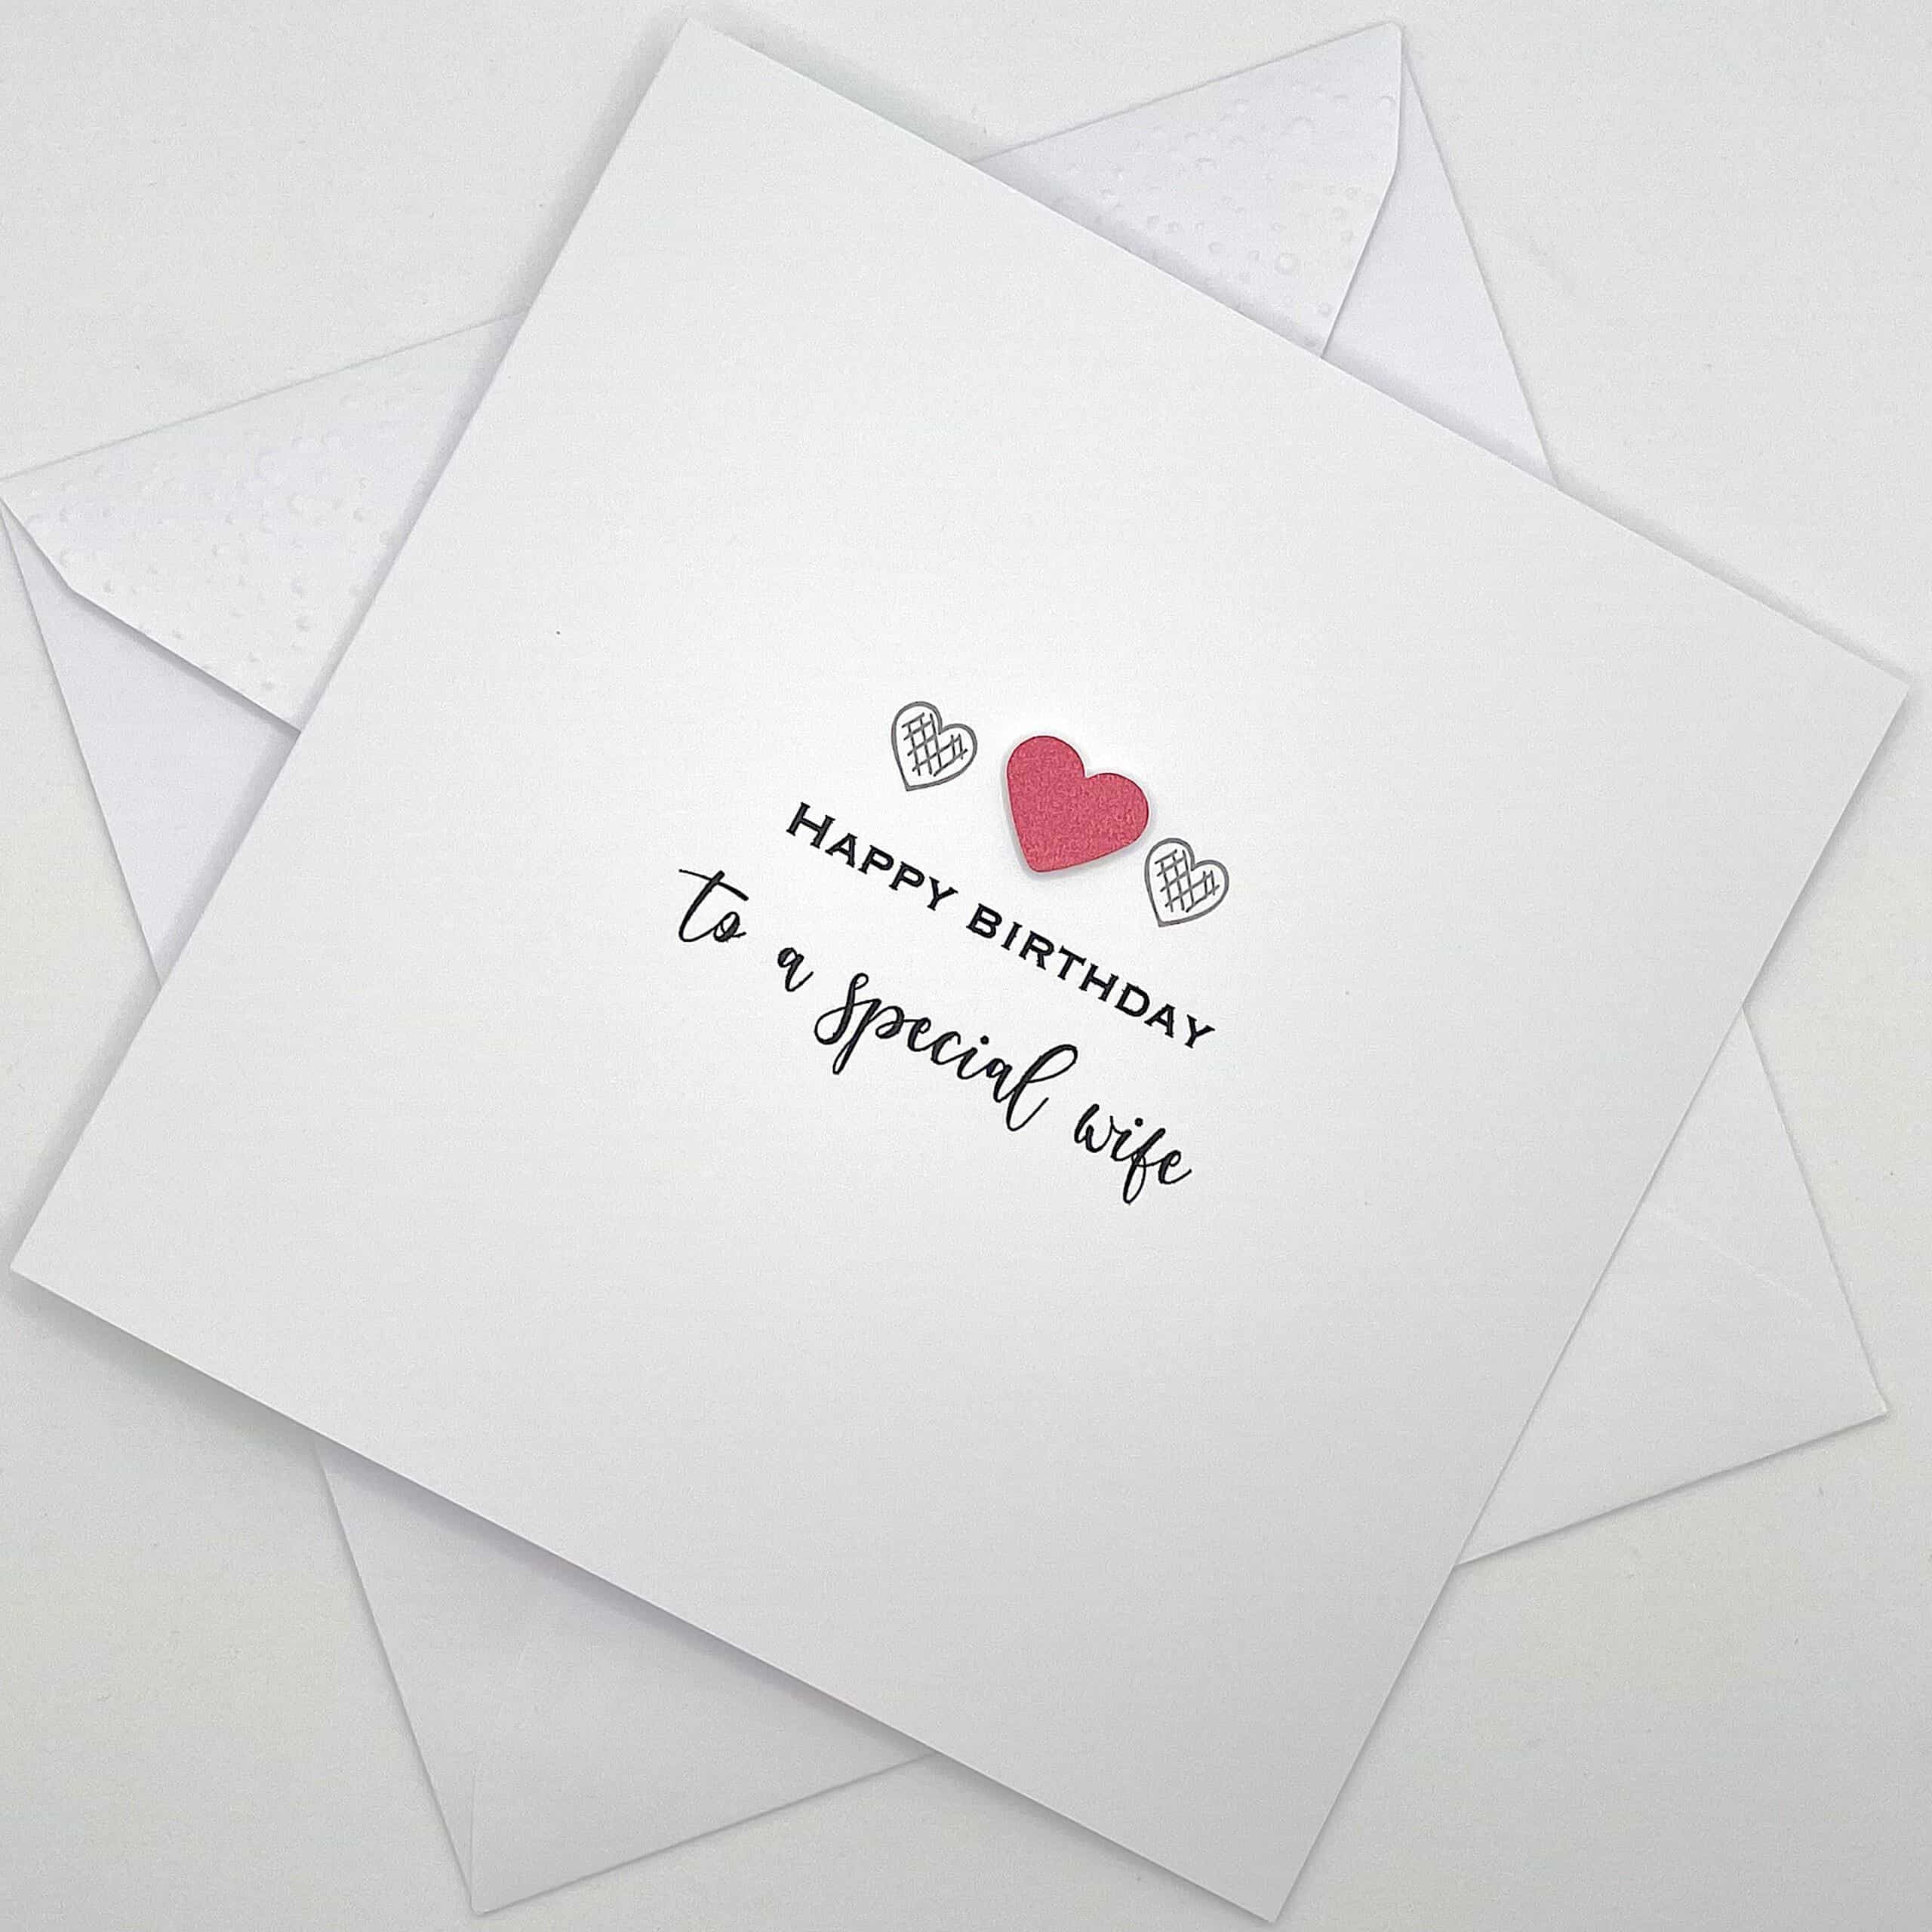 Handmade Special Wife Birthday Card with Hearts by Looks Inviting with Free UK Delivery